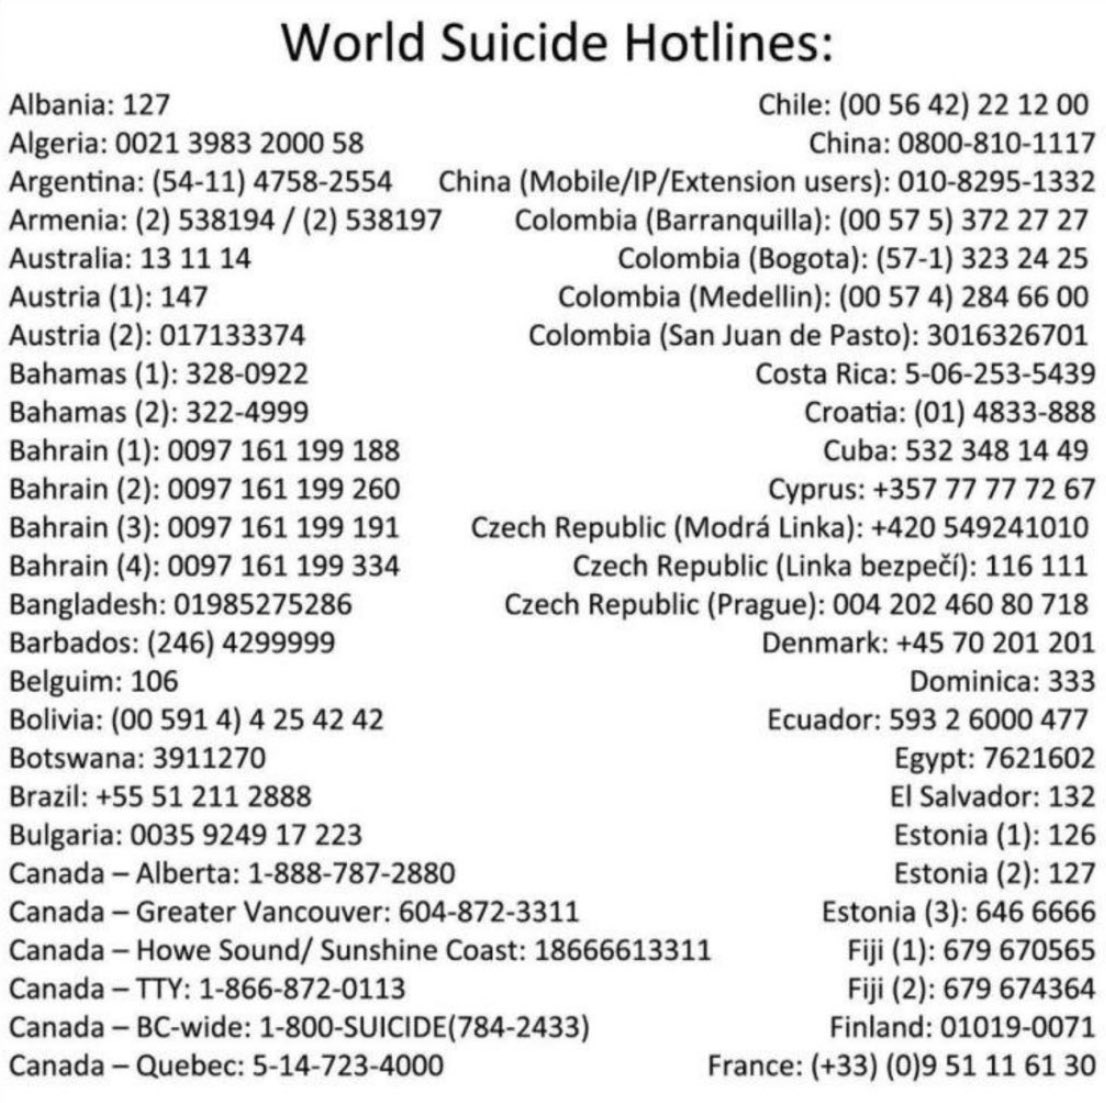 i am glad that many people are seeing this. i didn't put every single thing to say/not say, but i am pretty sure you got the message.if you're scared to seek professional help, it's ok! you can talk to a friend or dm me! here are suicide hotlines for all around the world.